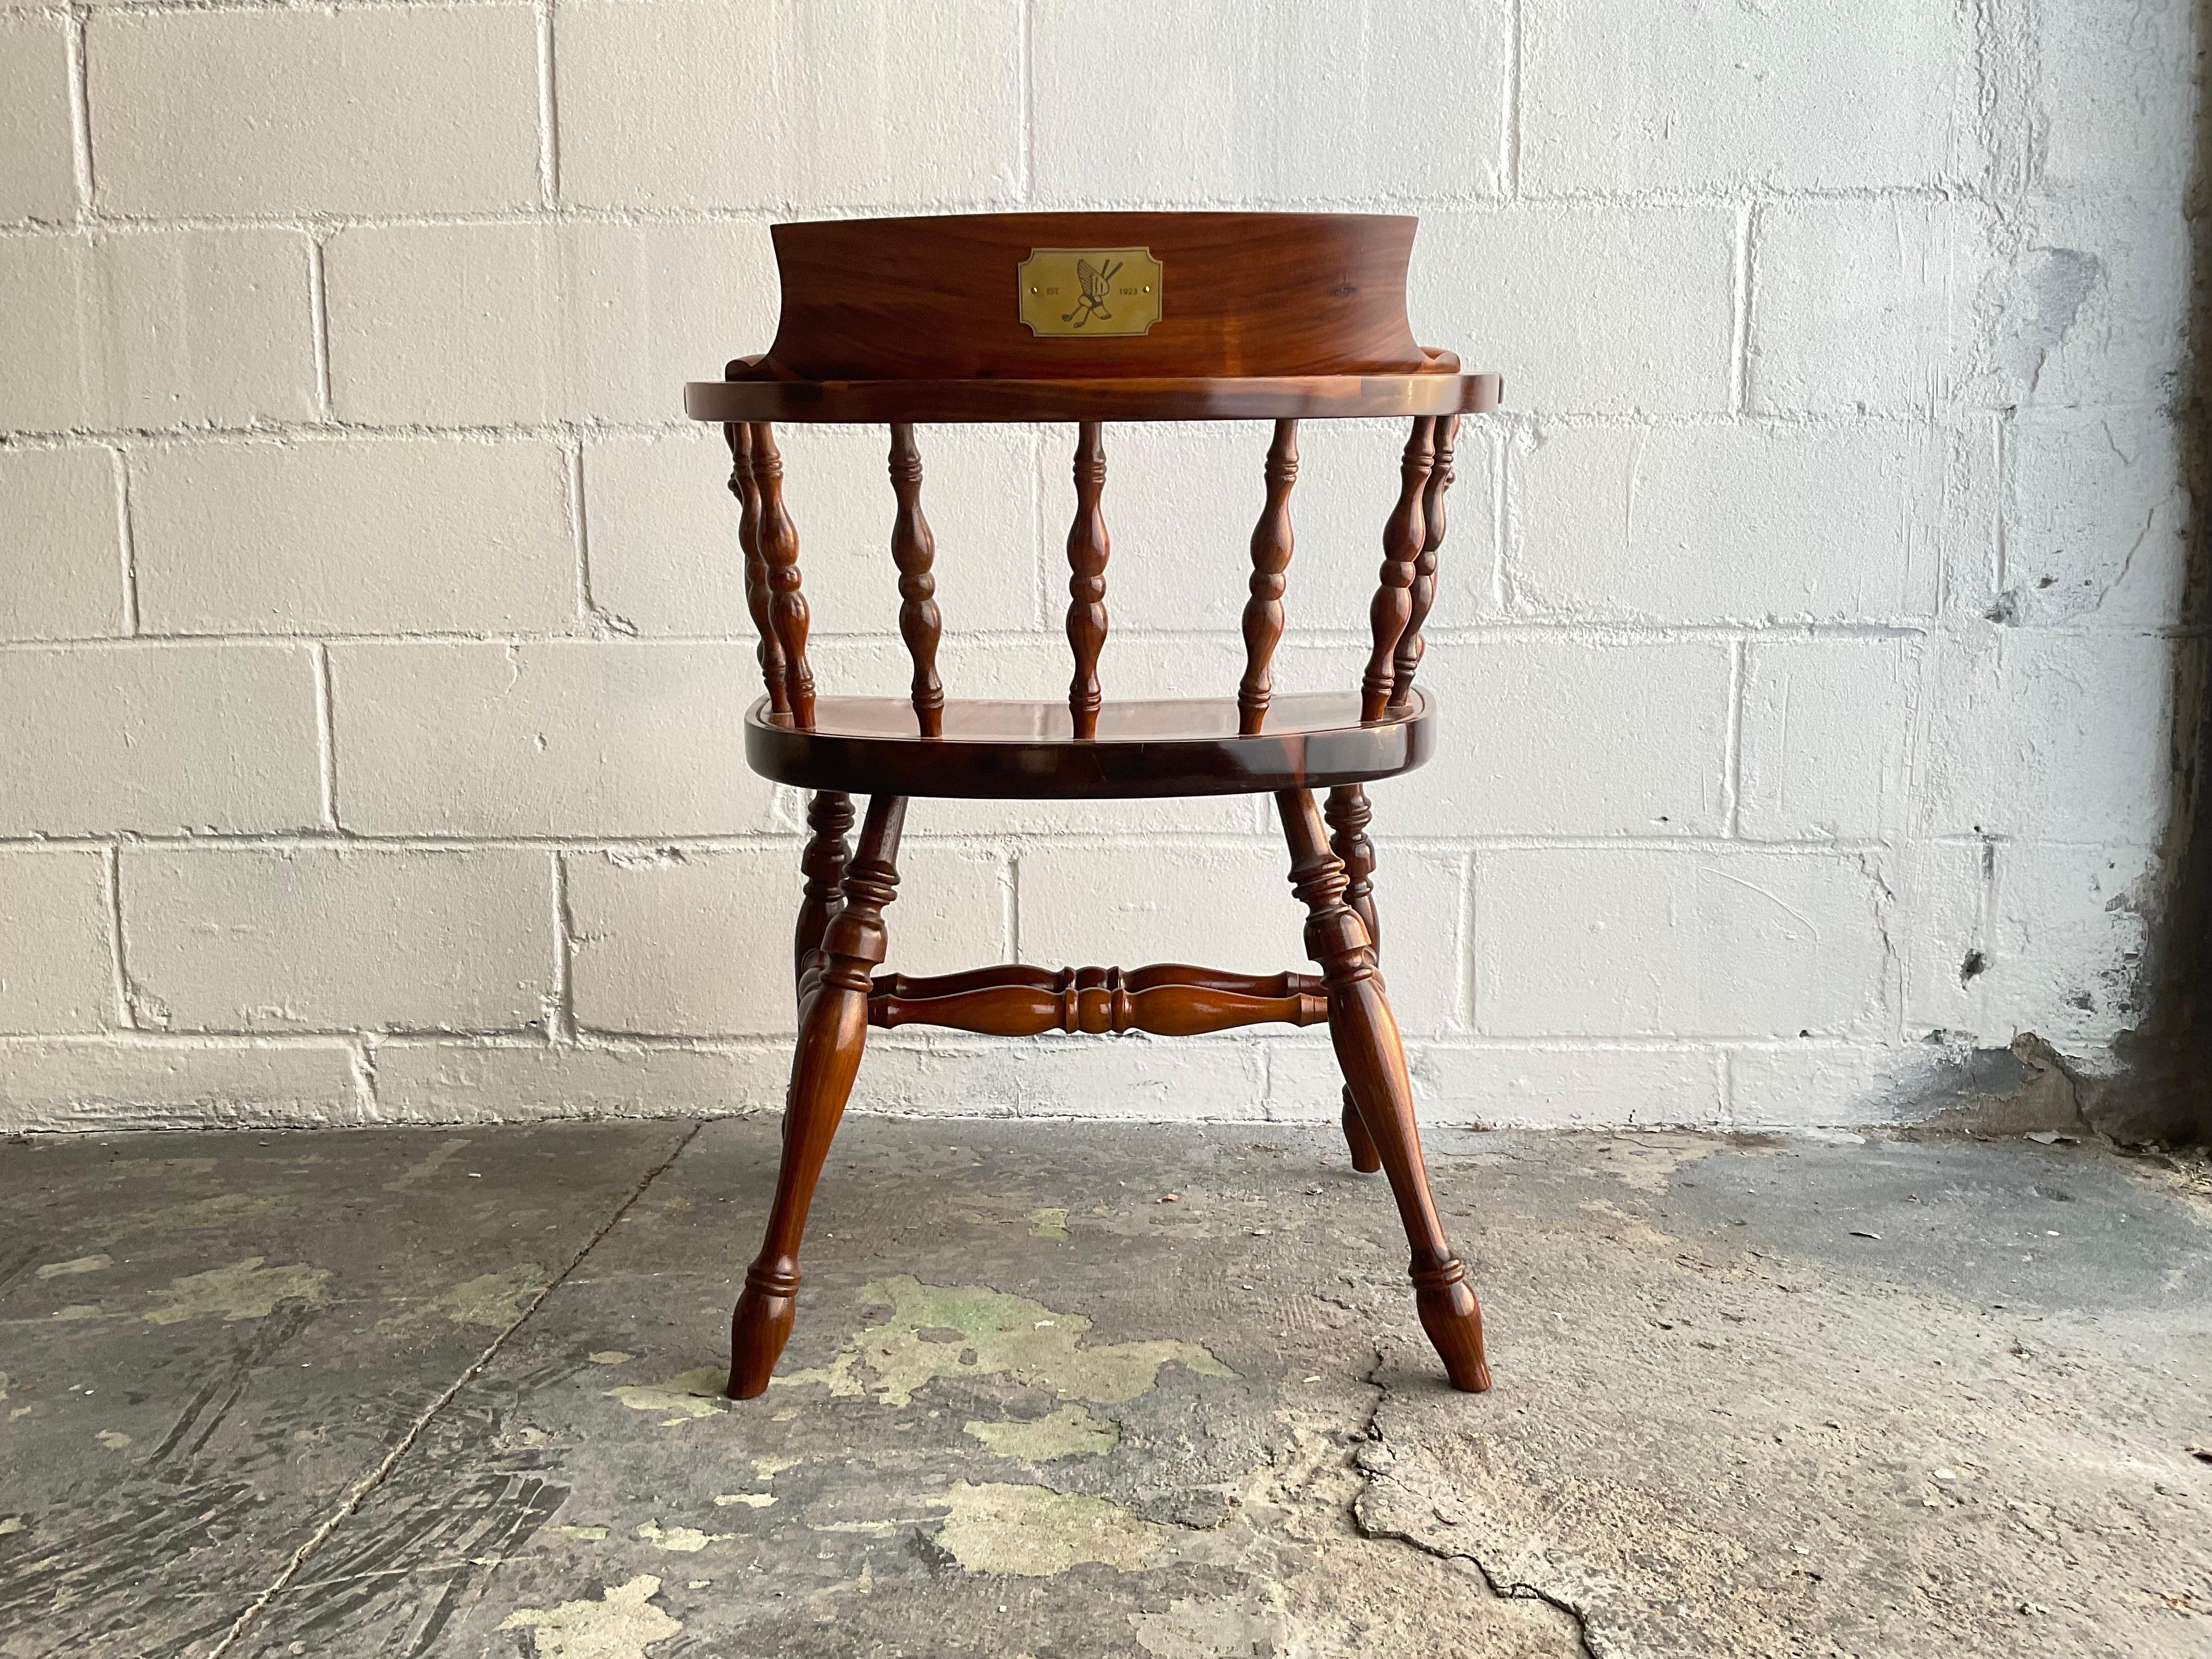 Four remaining examples of a set of 90 handmade solid walnut Windsor captain’s chairs executed for Winged Foot Golf Club ahead of the 2020 U.S Open. The rest of the set is currently in use in the Grille Room at Winged Foot—a storied location in the